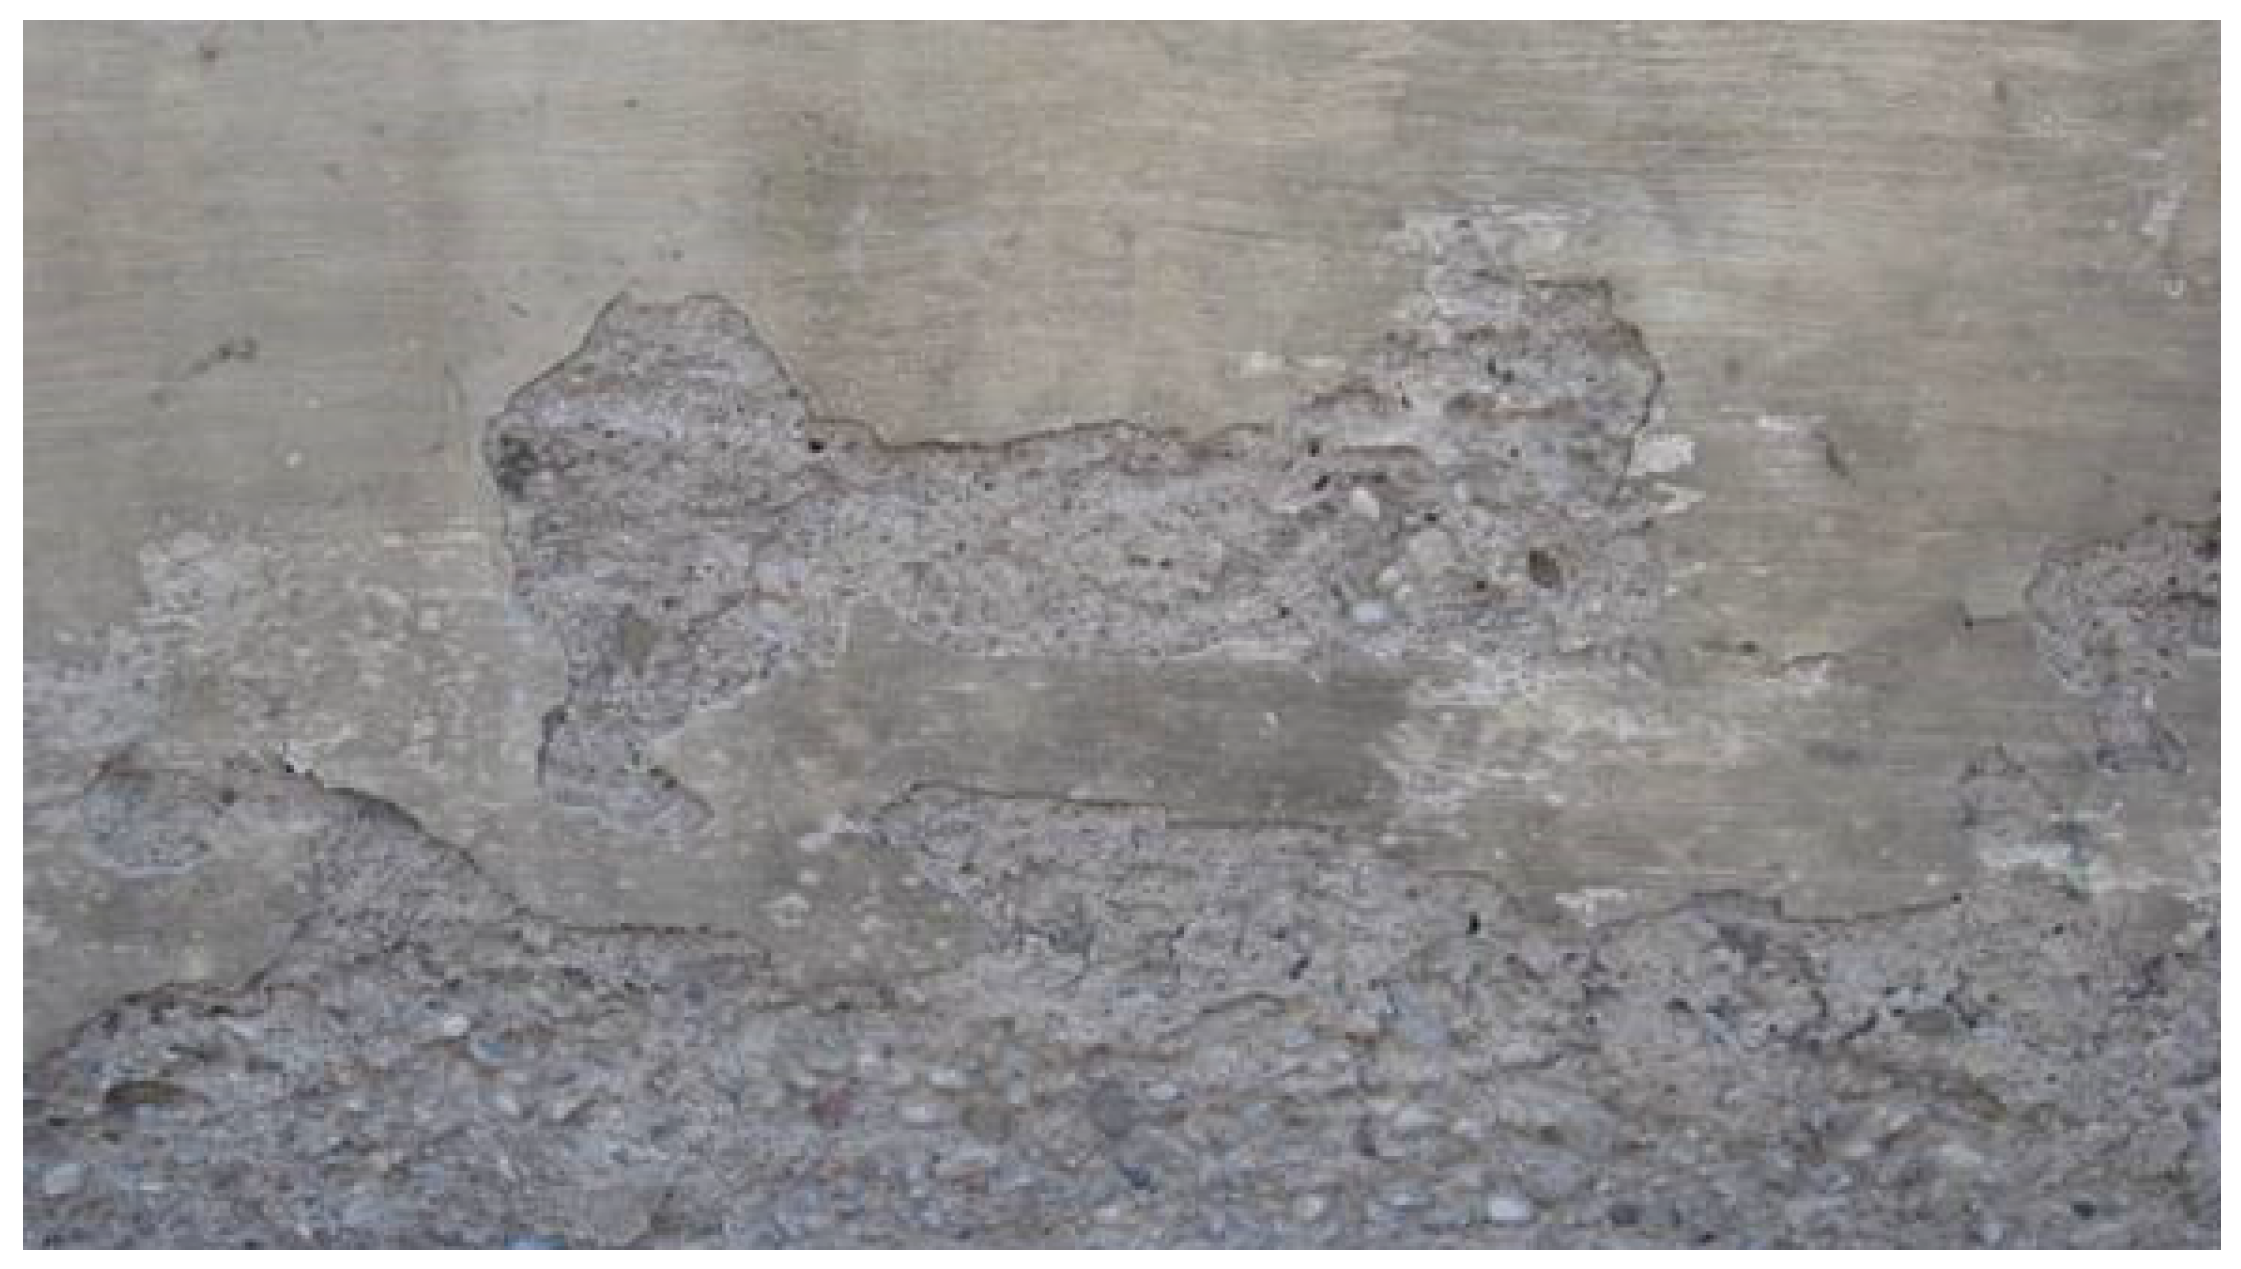 Coatings | Free Full-Text | Concrete Damage in Field Conditions and ...